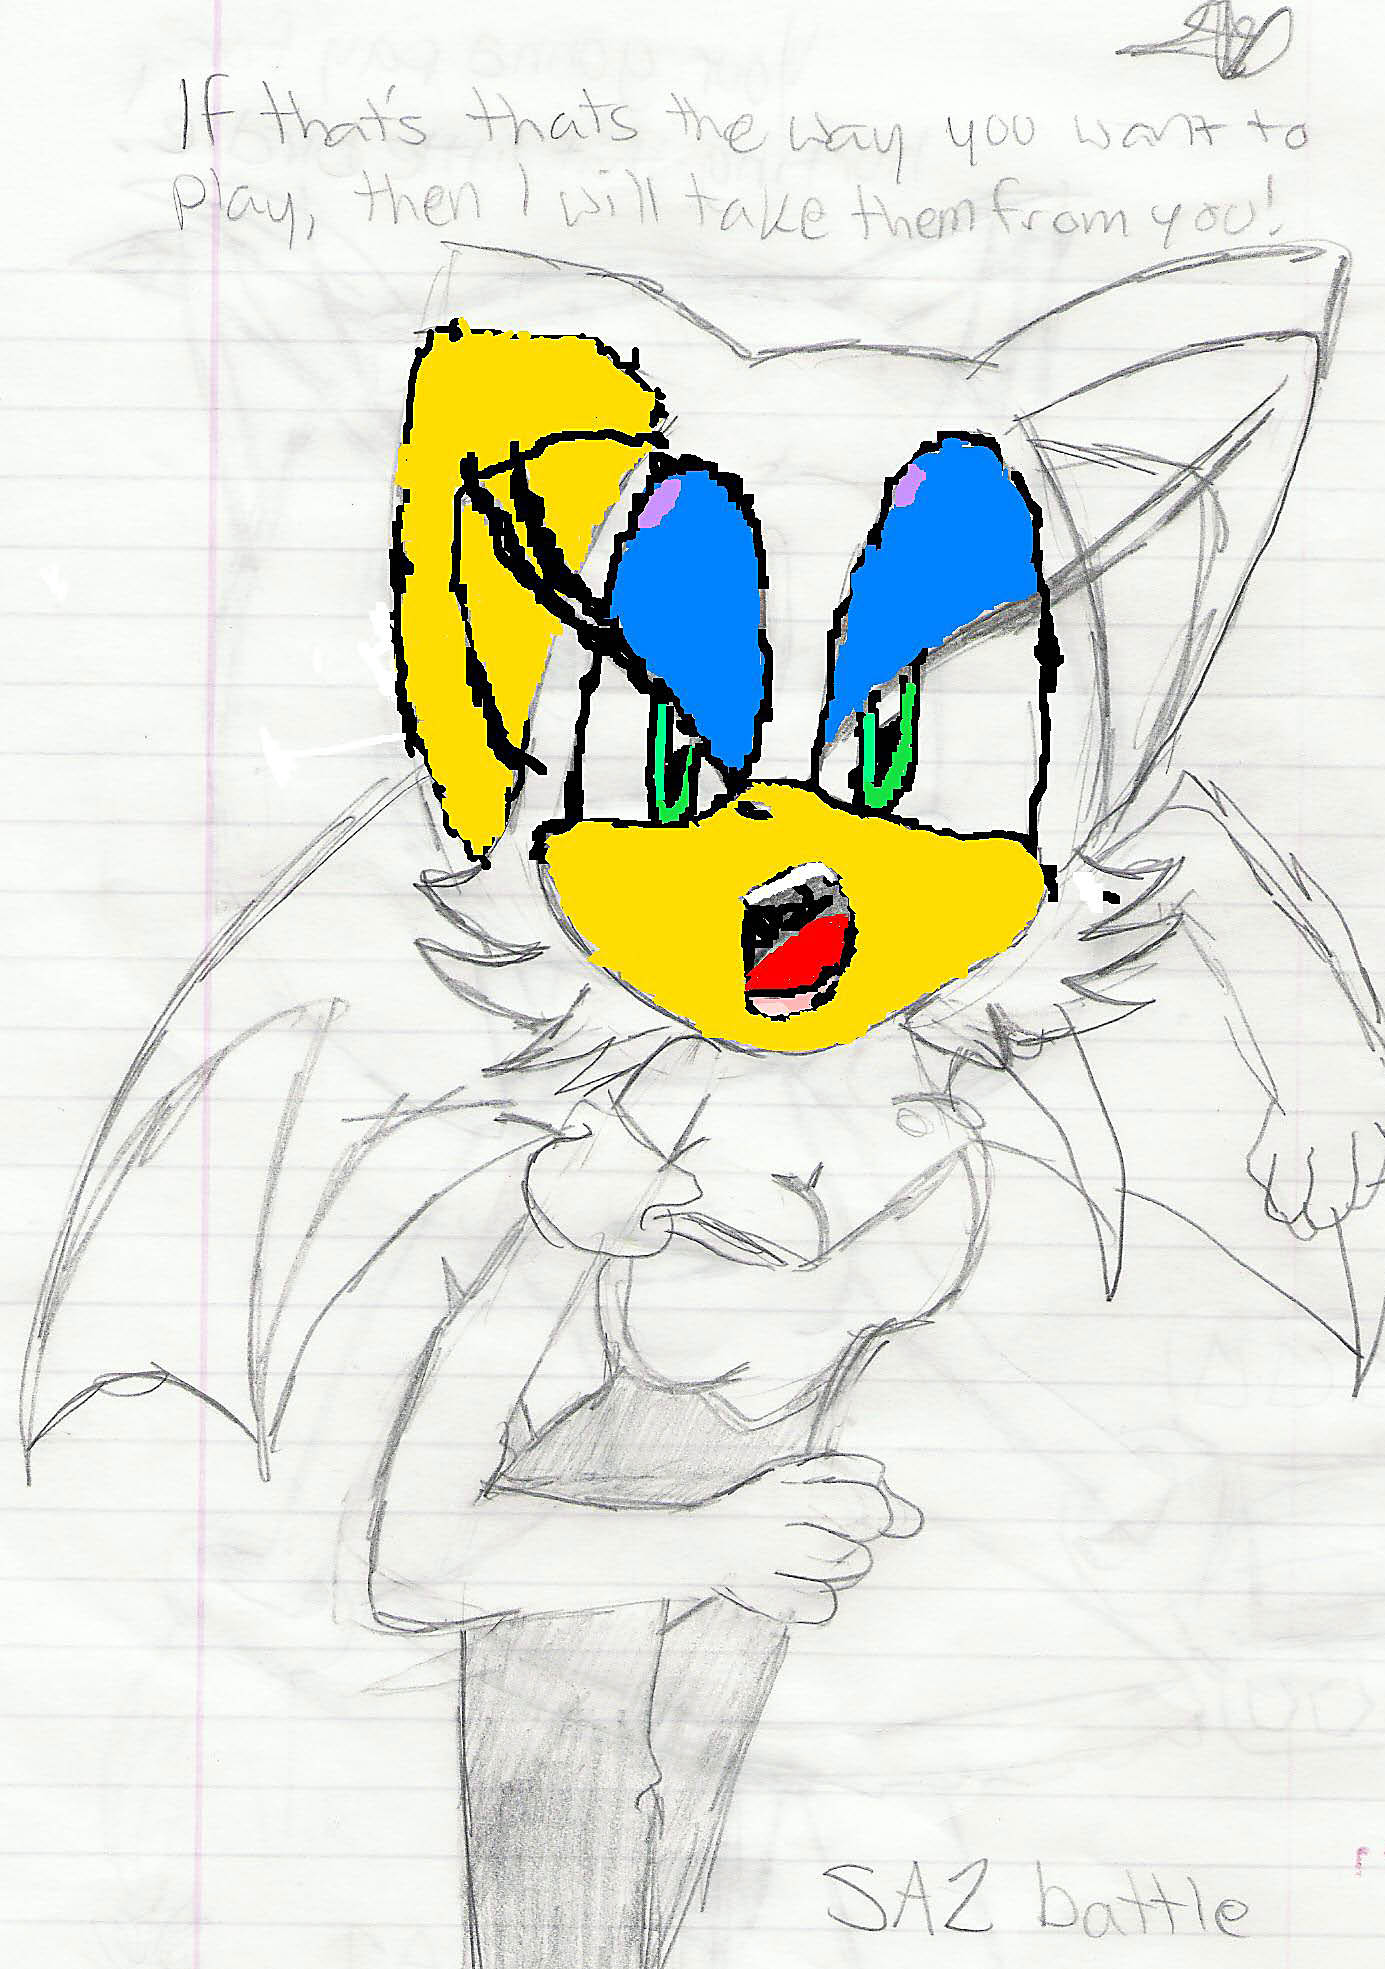 Rouge from SA2 battle (half-colored) by crazzy4cradily